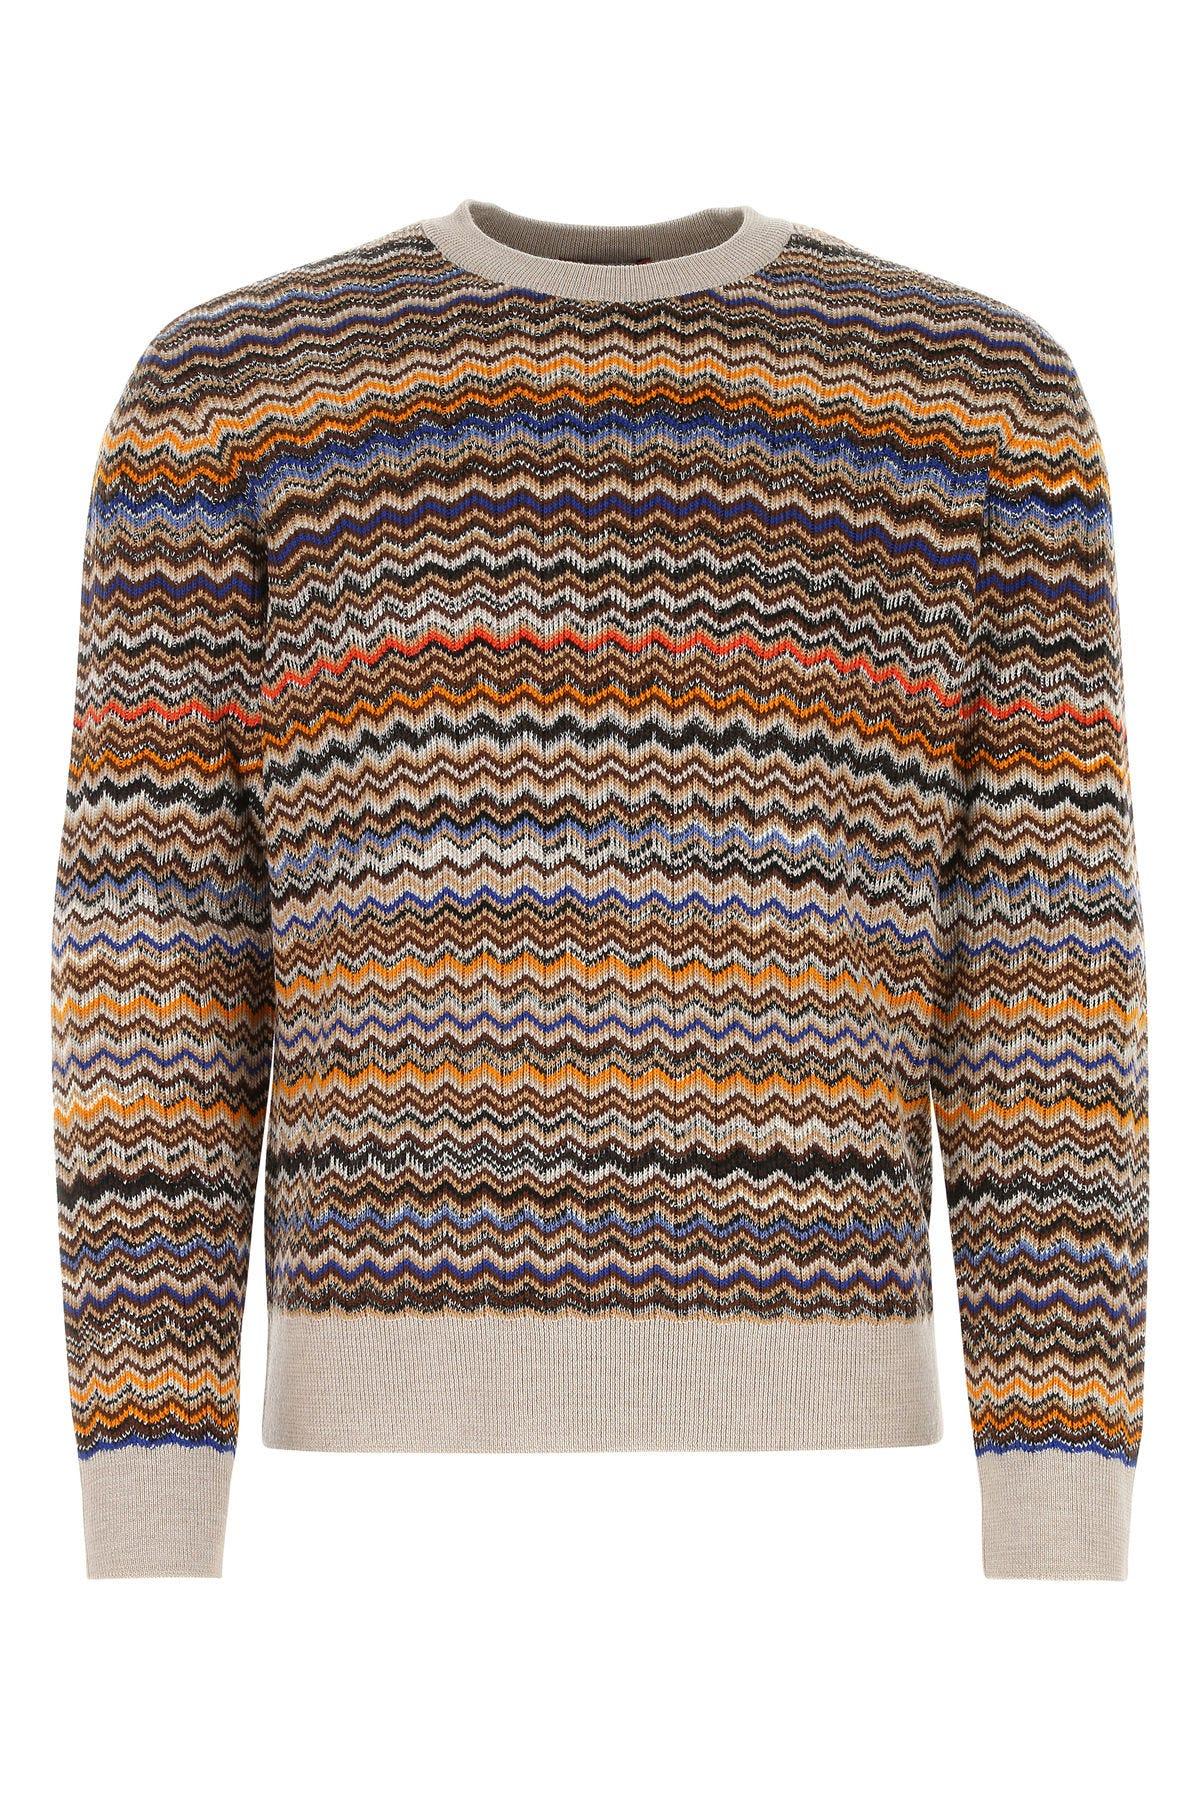 Missoni Embroidered Wool Sweater